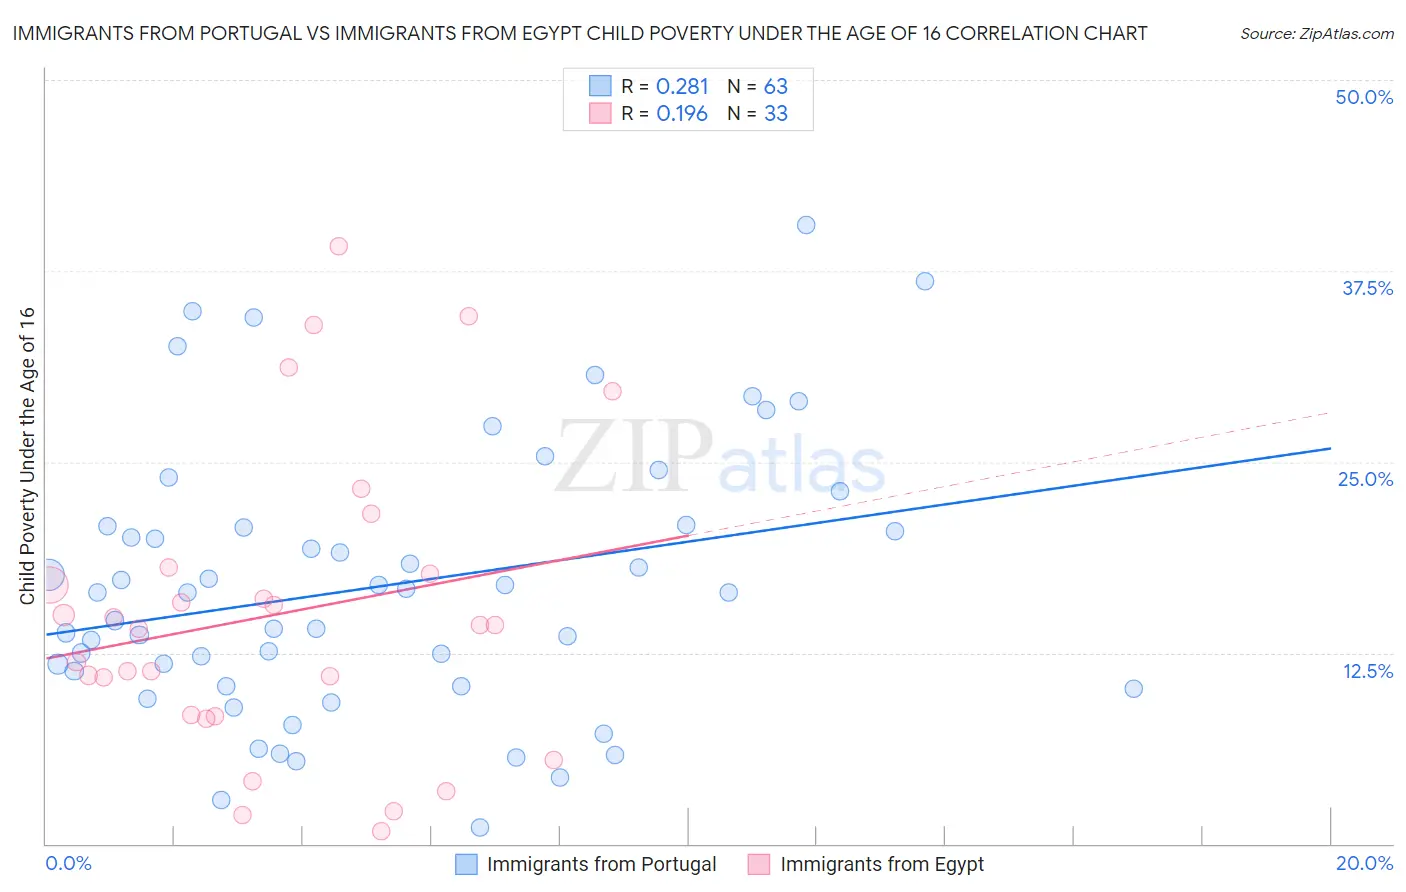 Immigrants from Portugal vs Immigrants from Egypt Child Poverty Under the Age of 16